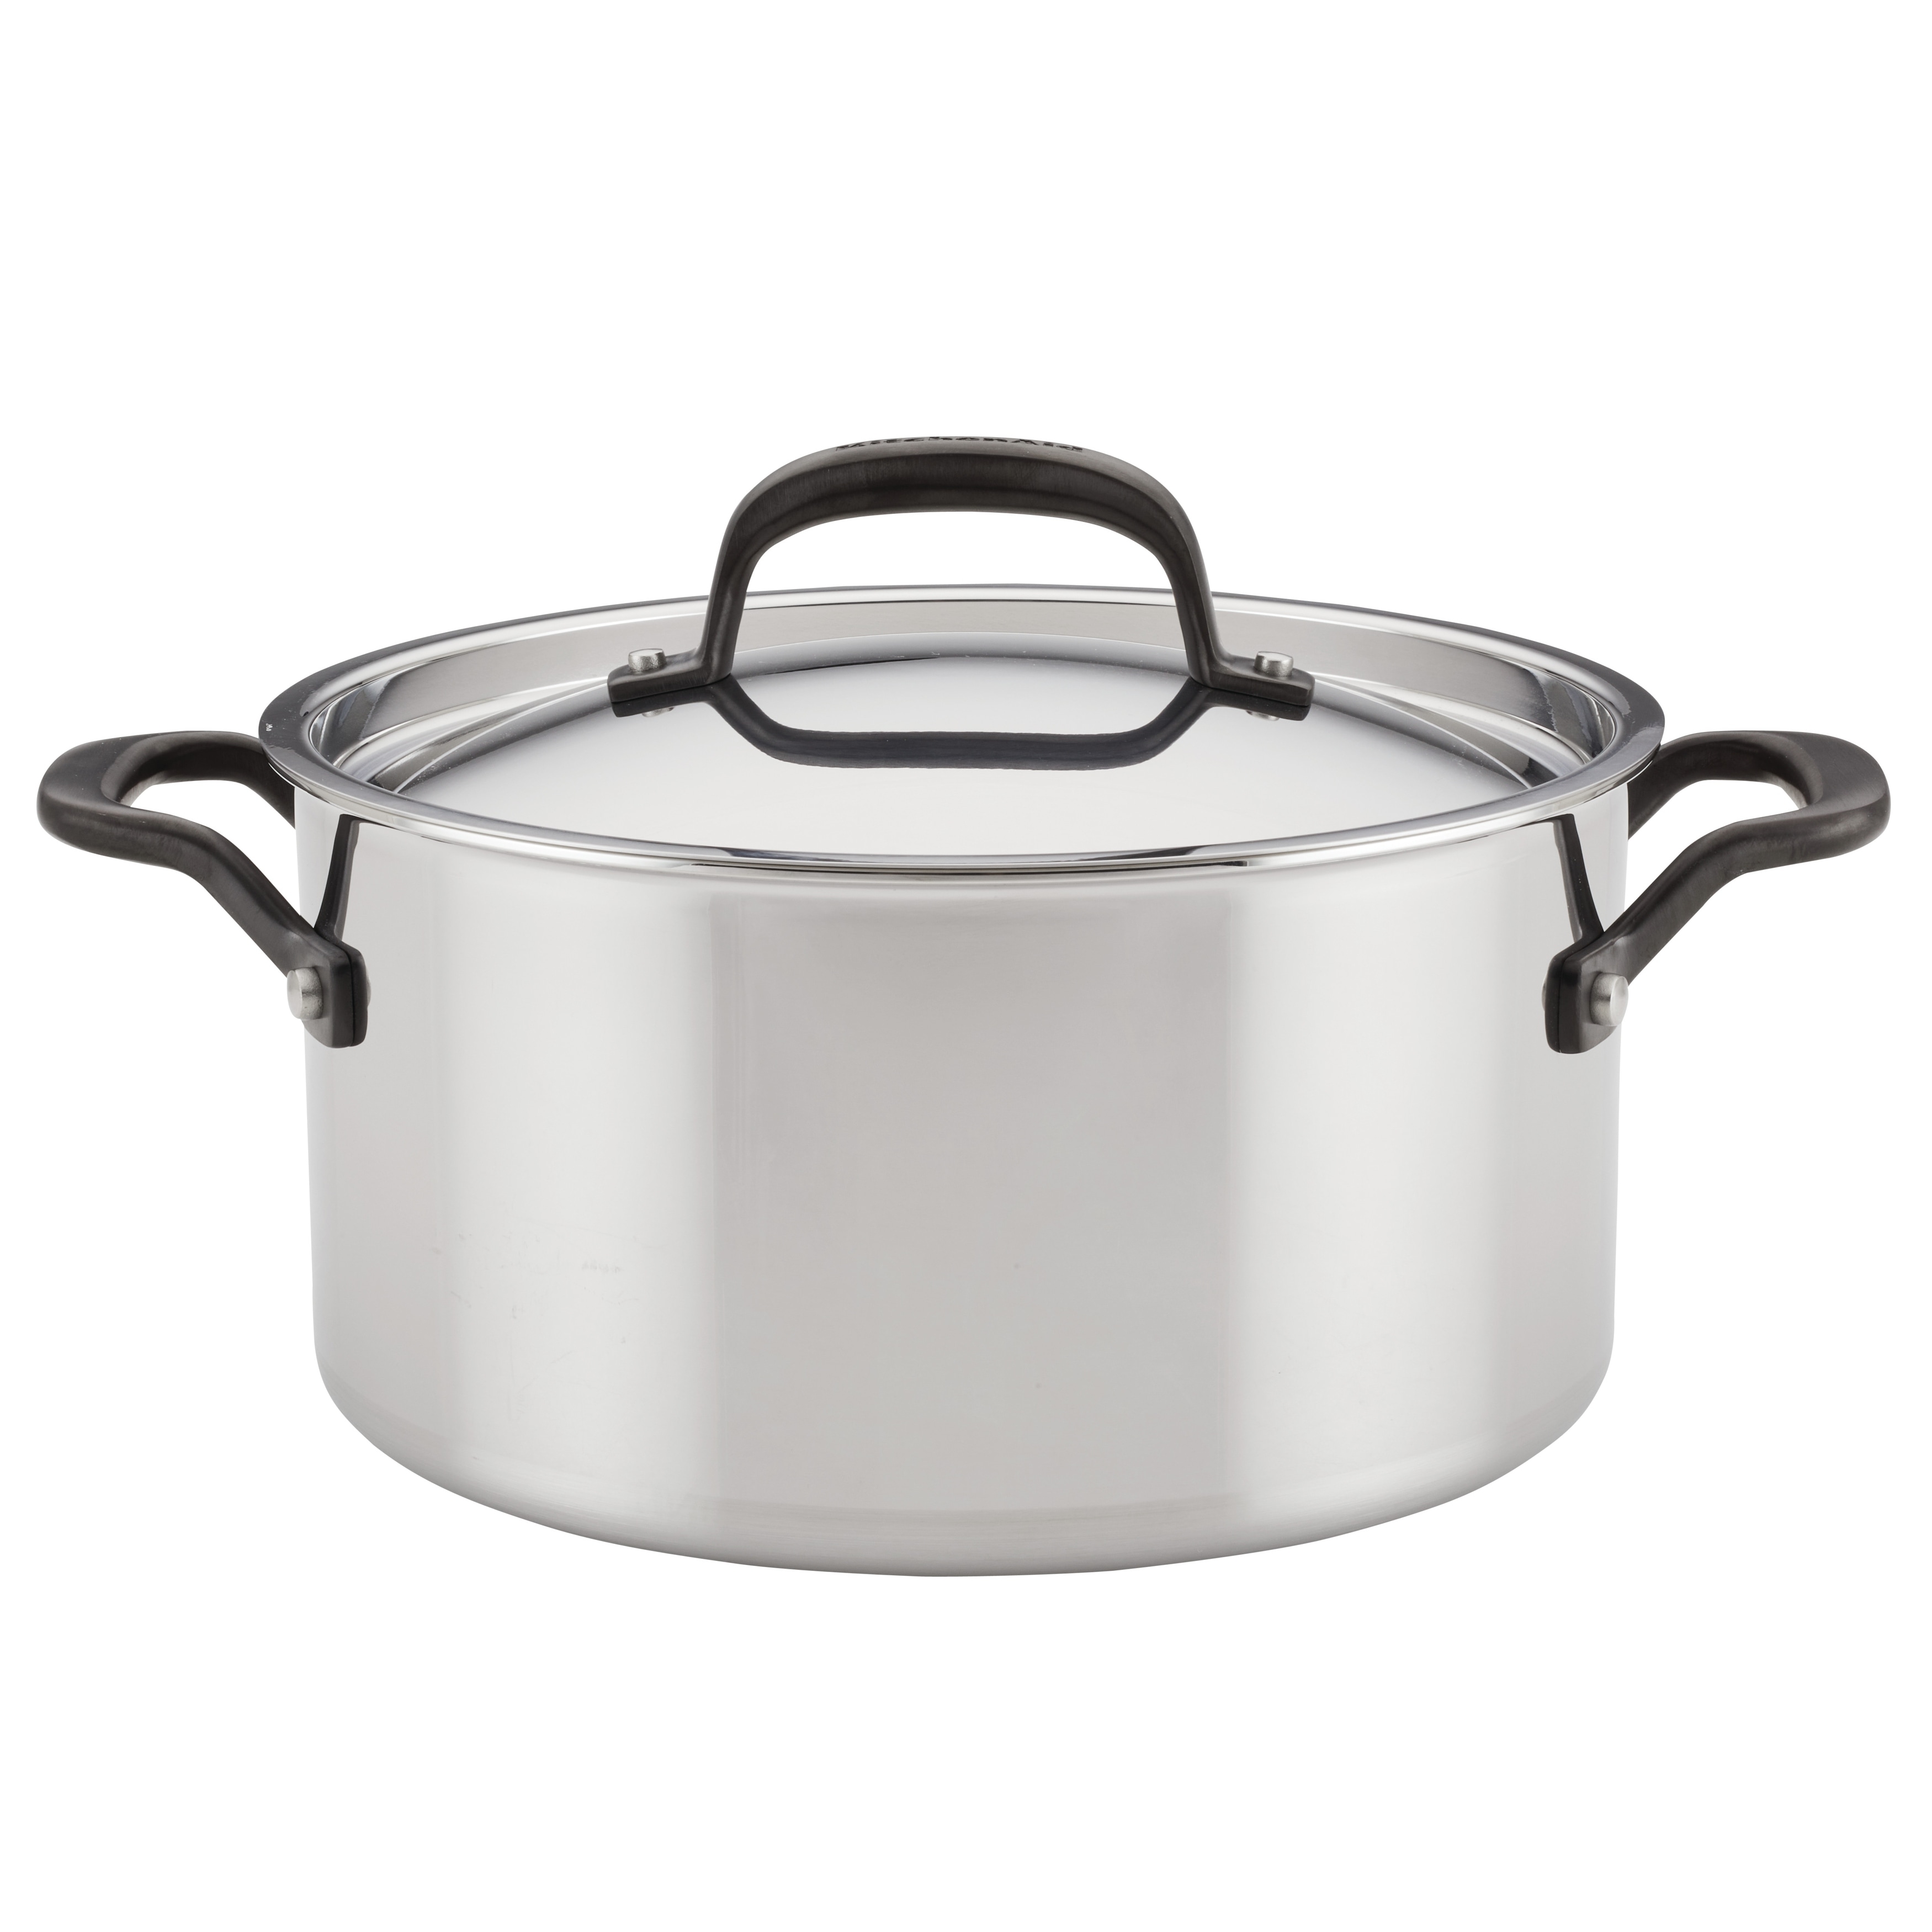 KitchenAid 5-Ply Clad Stainless Steel Induction Stockpot with Lid, 6-Quart,  Polished Stainless Steel - Bed Bath & Beyond - 38077521